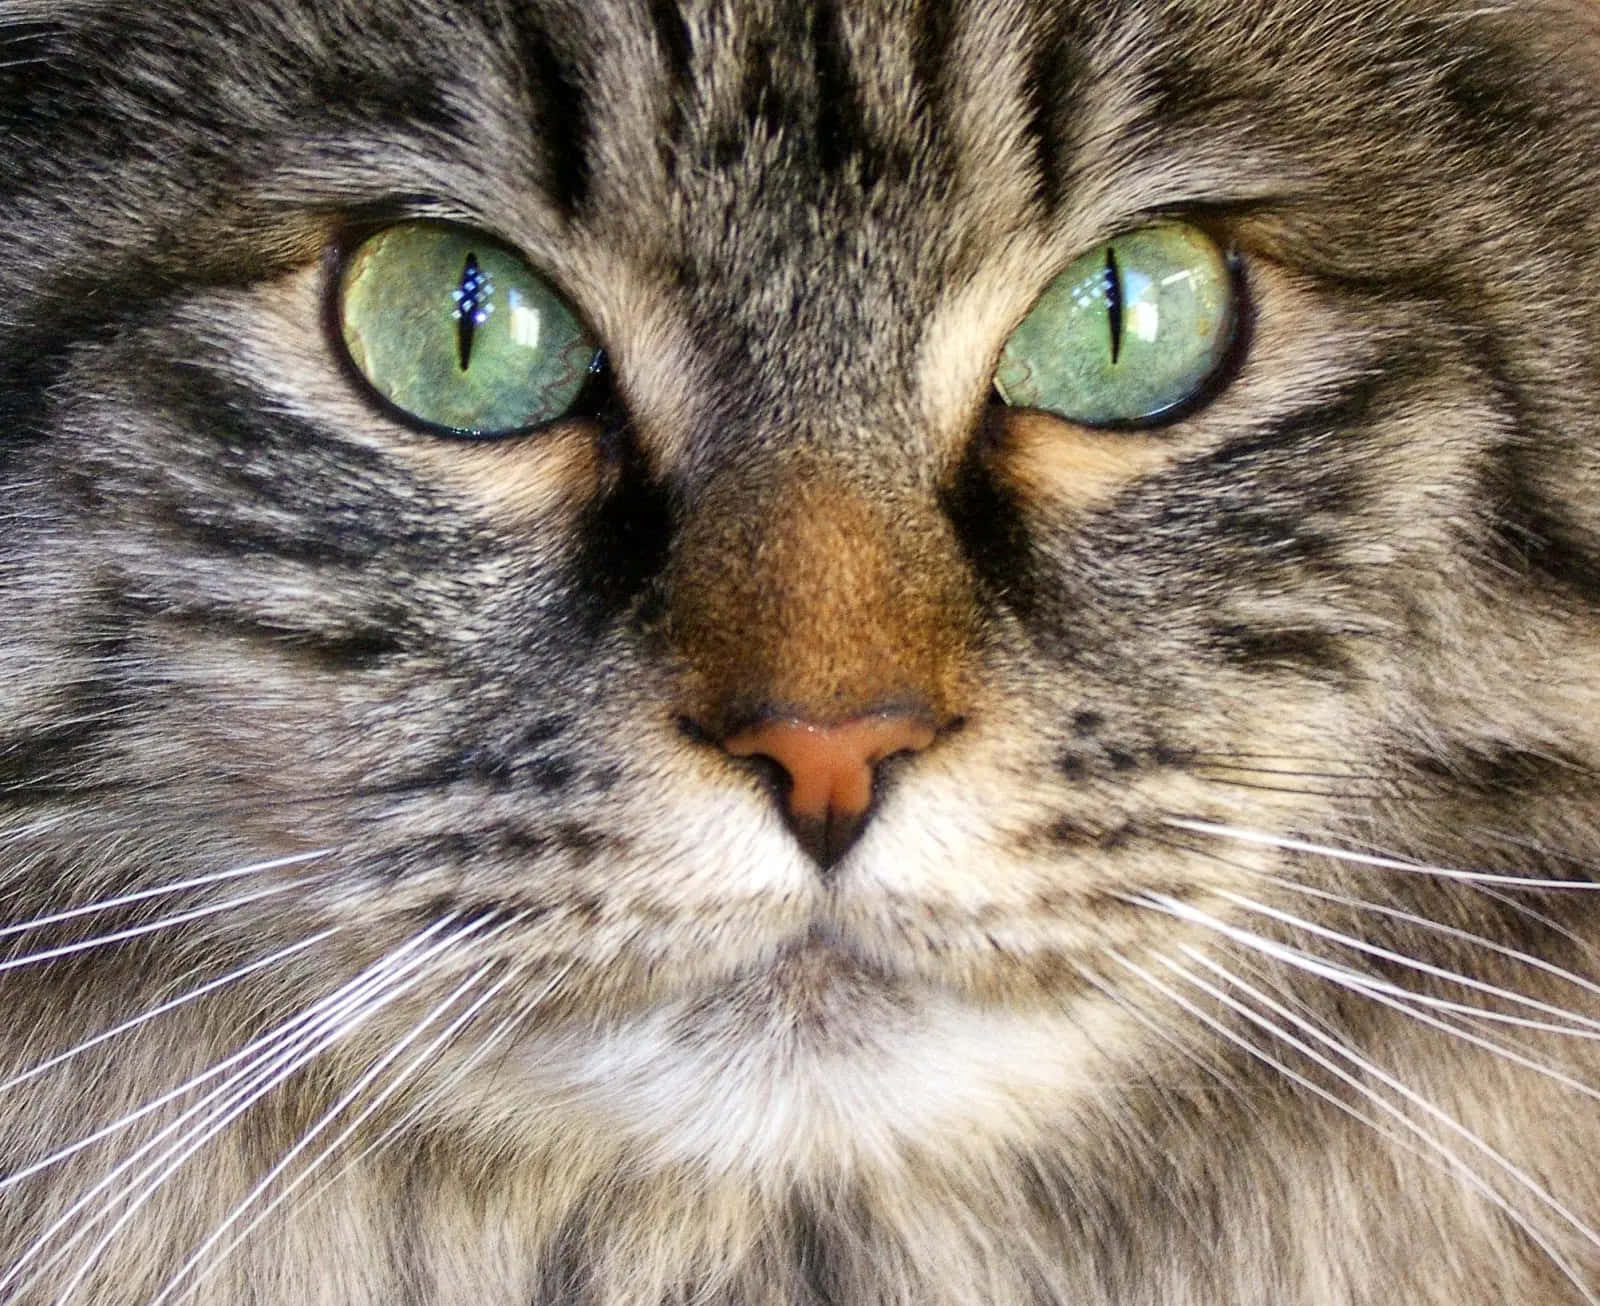 A Close Up Of A Cat With Green Eyes